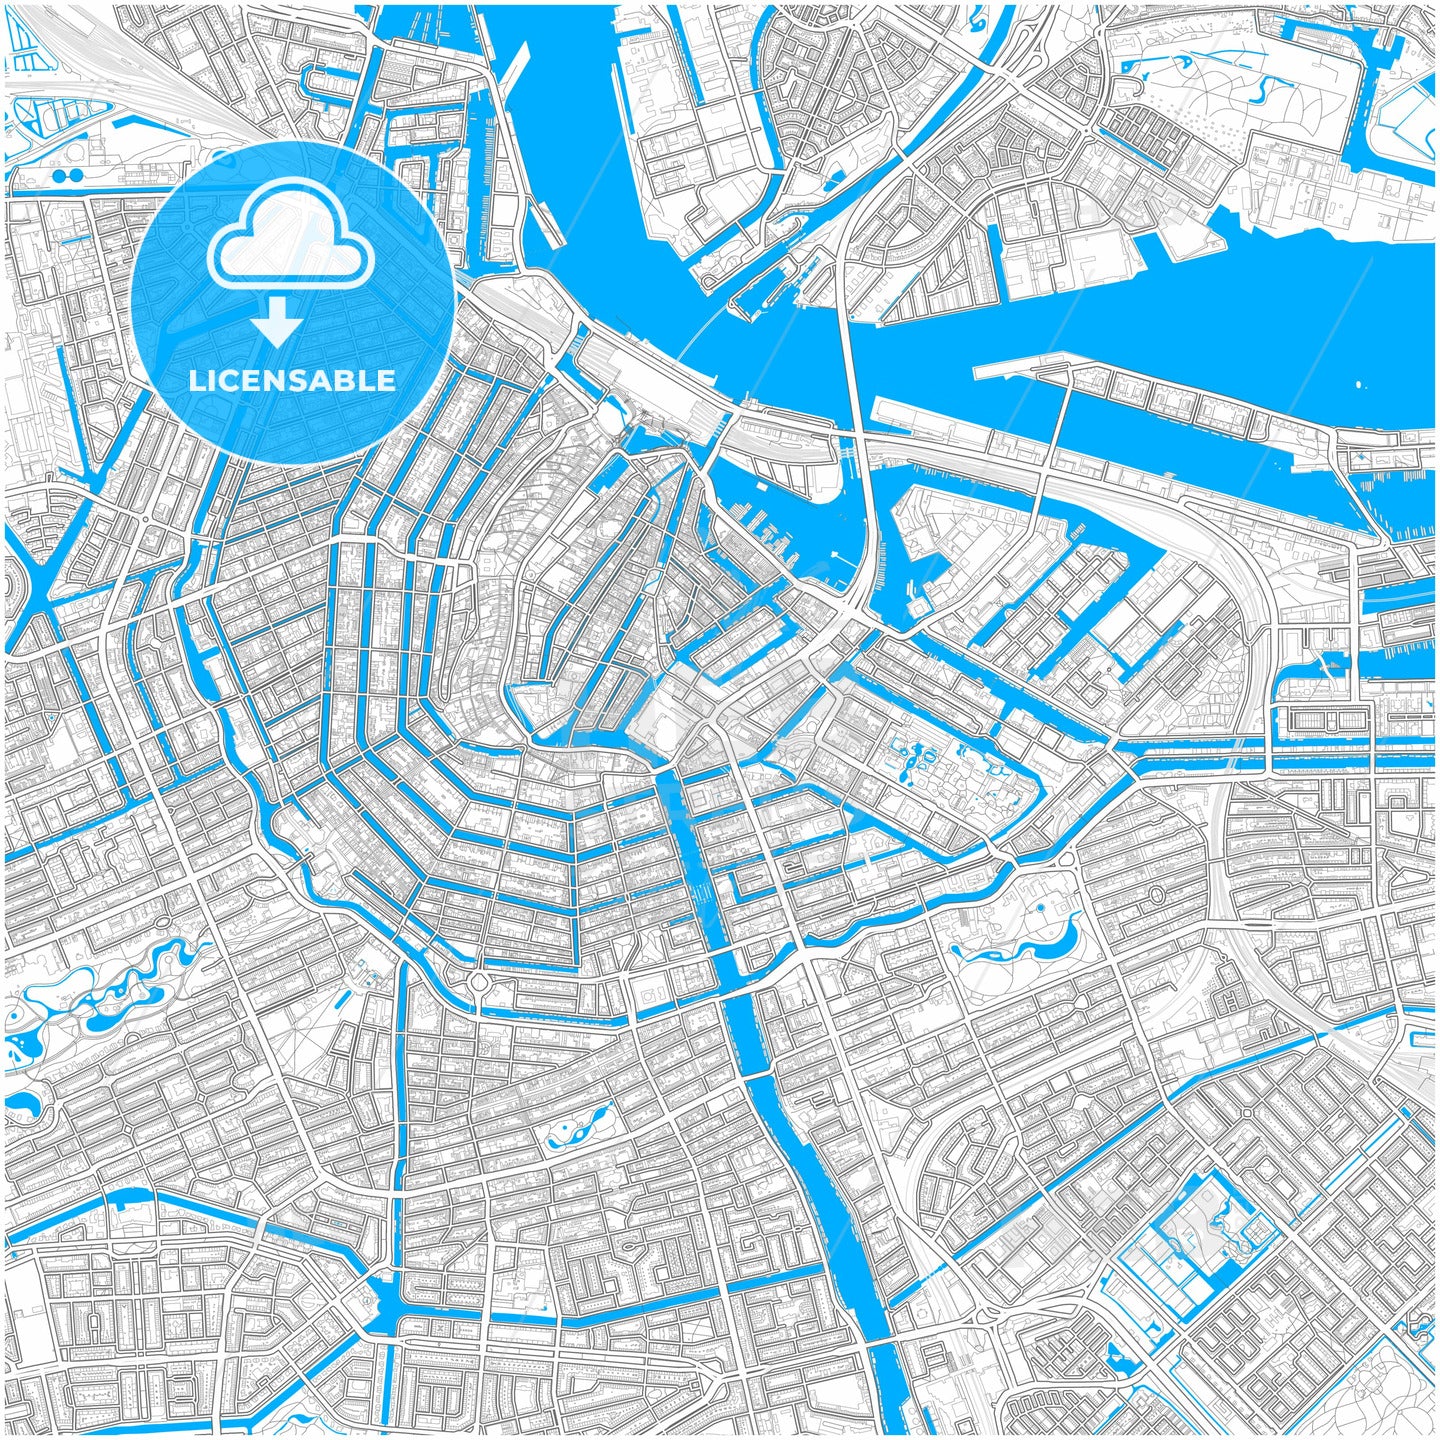 Amsterdam, North Holland, Netherlands, city map with high quality roads.